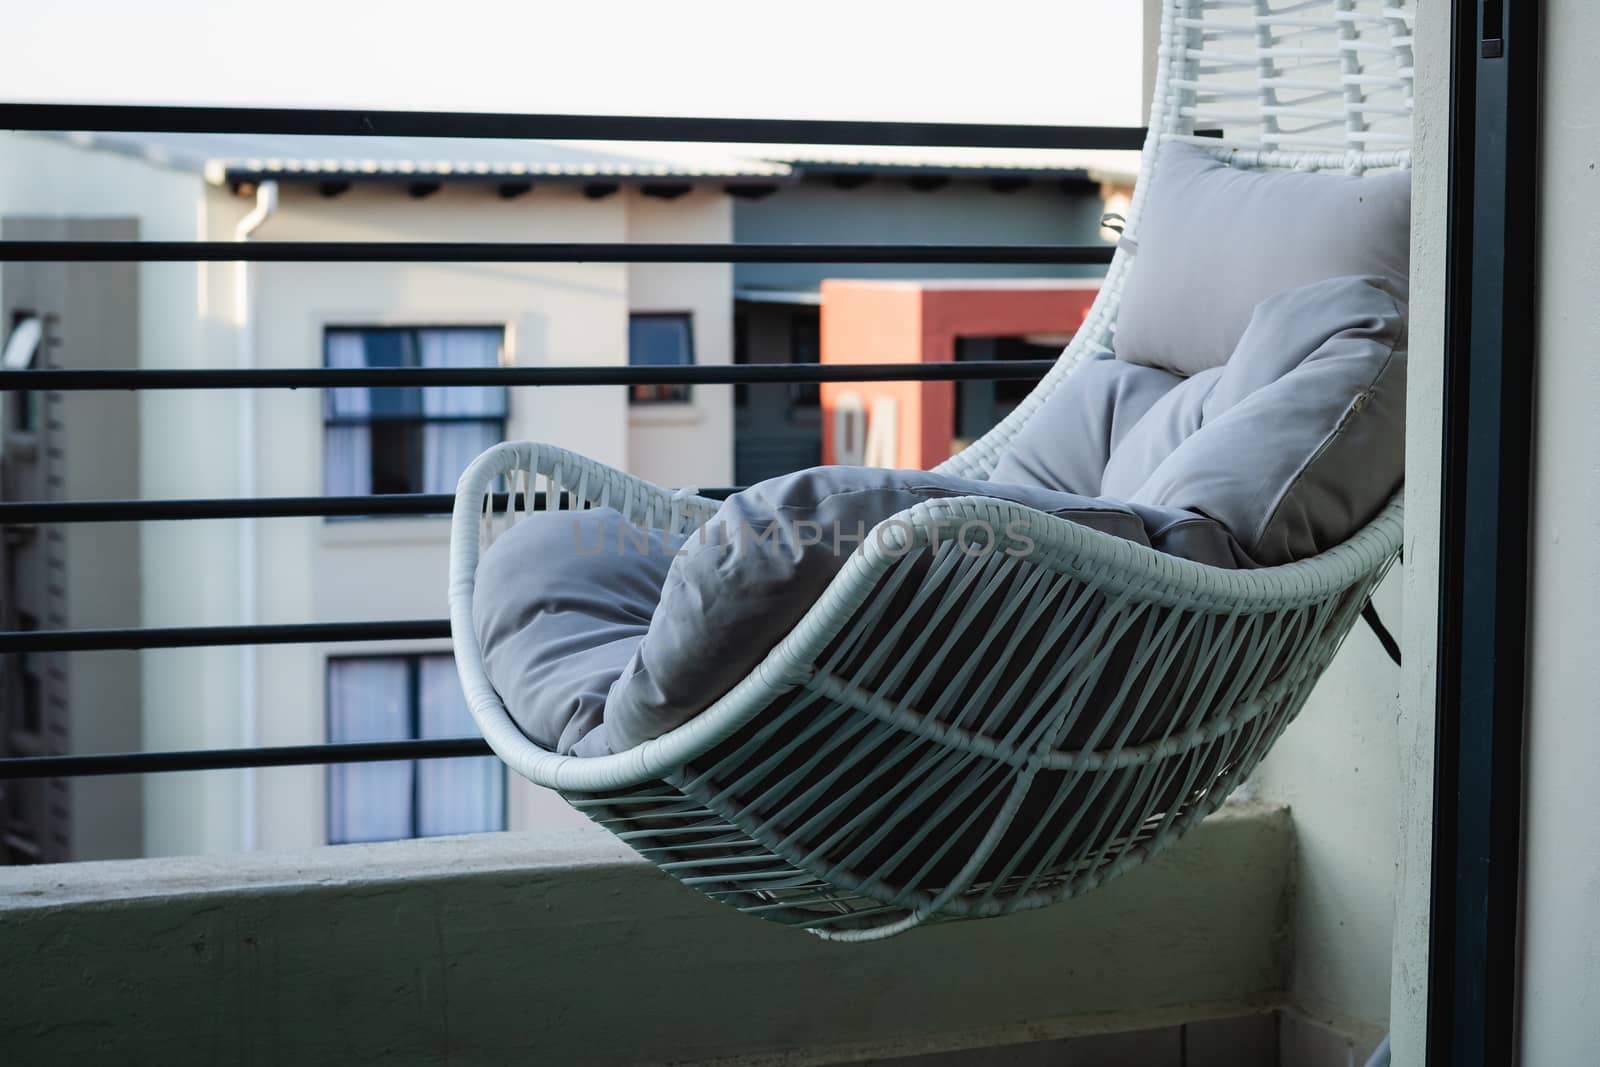 Chair in a town house balcony